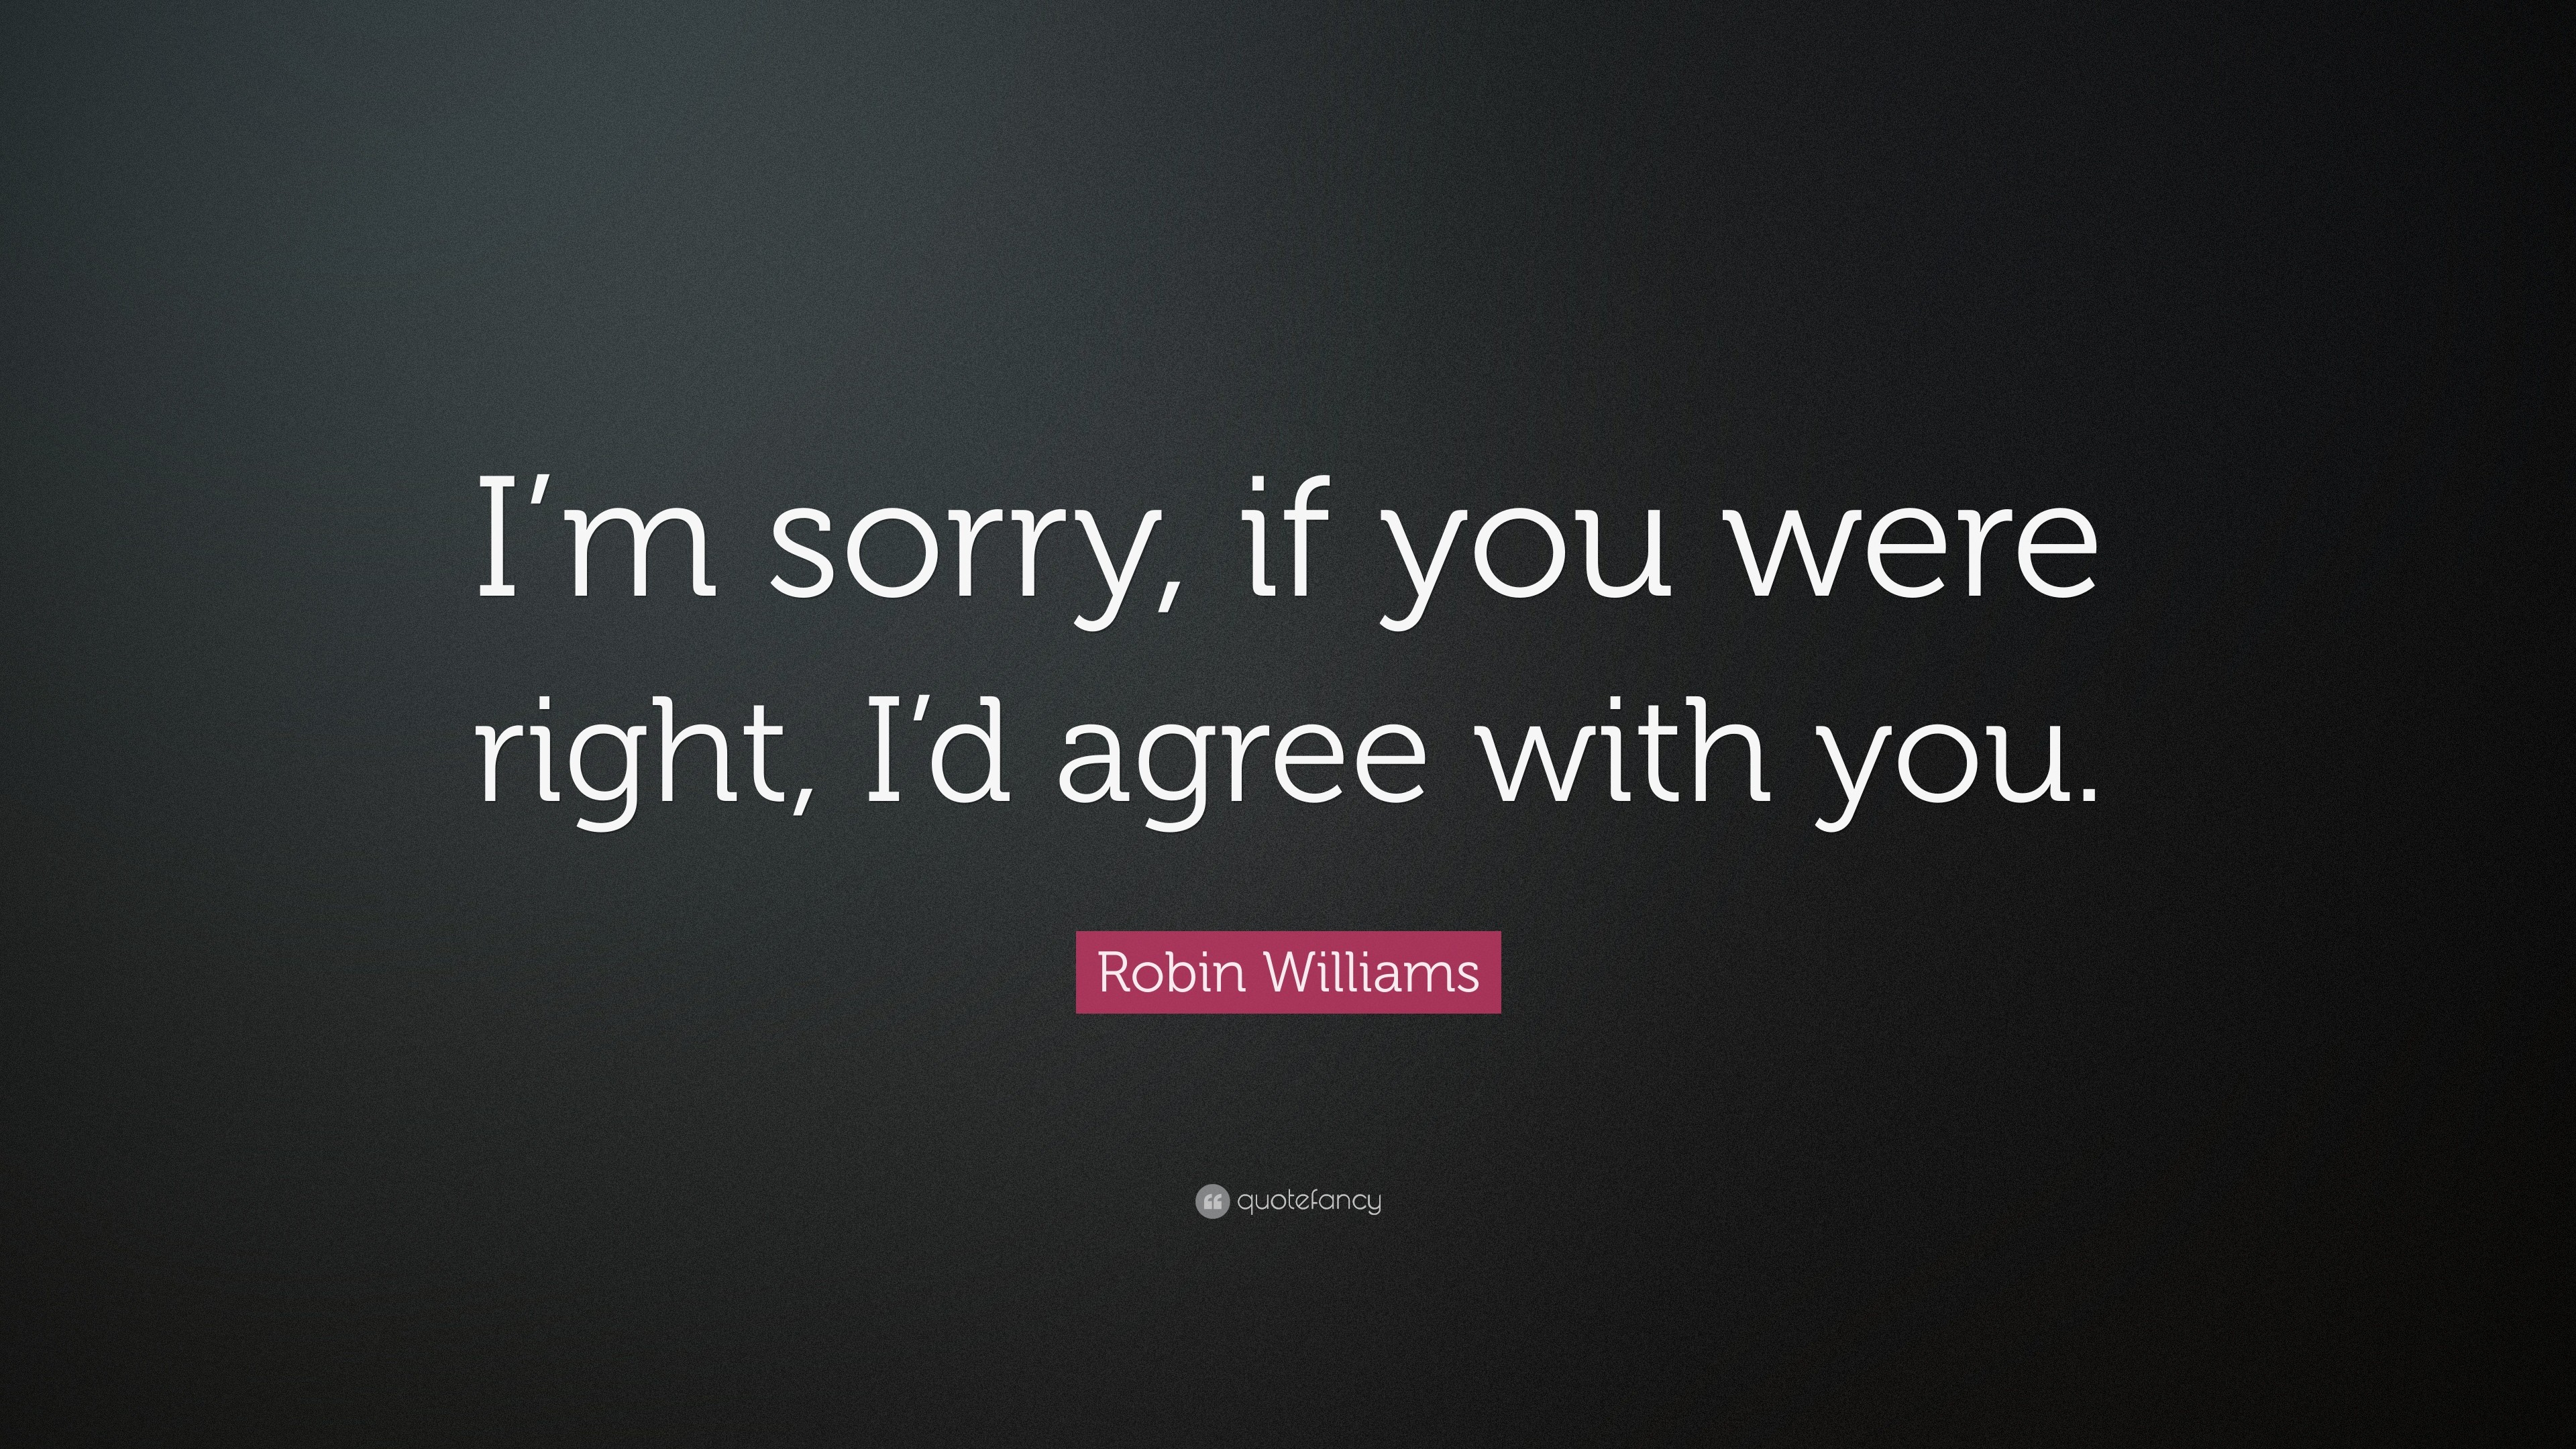 3840x2160 Robin Williams Quote: “I'm sorry, if you were right, I